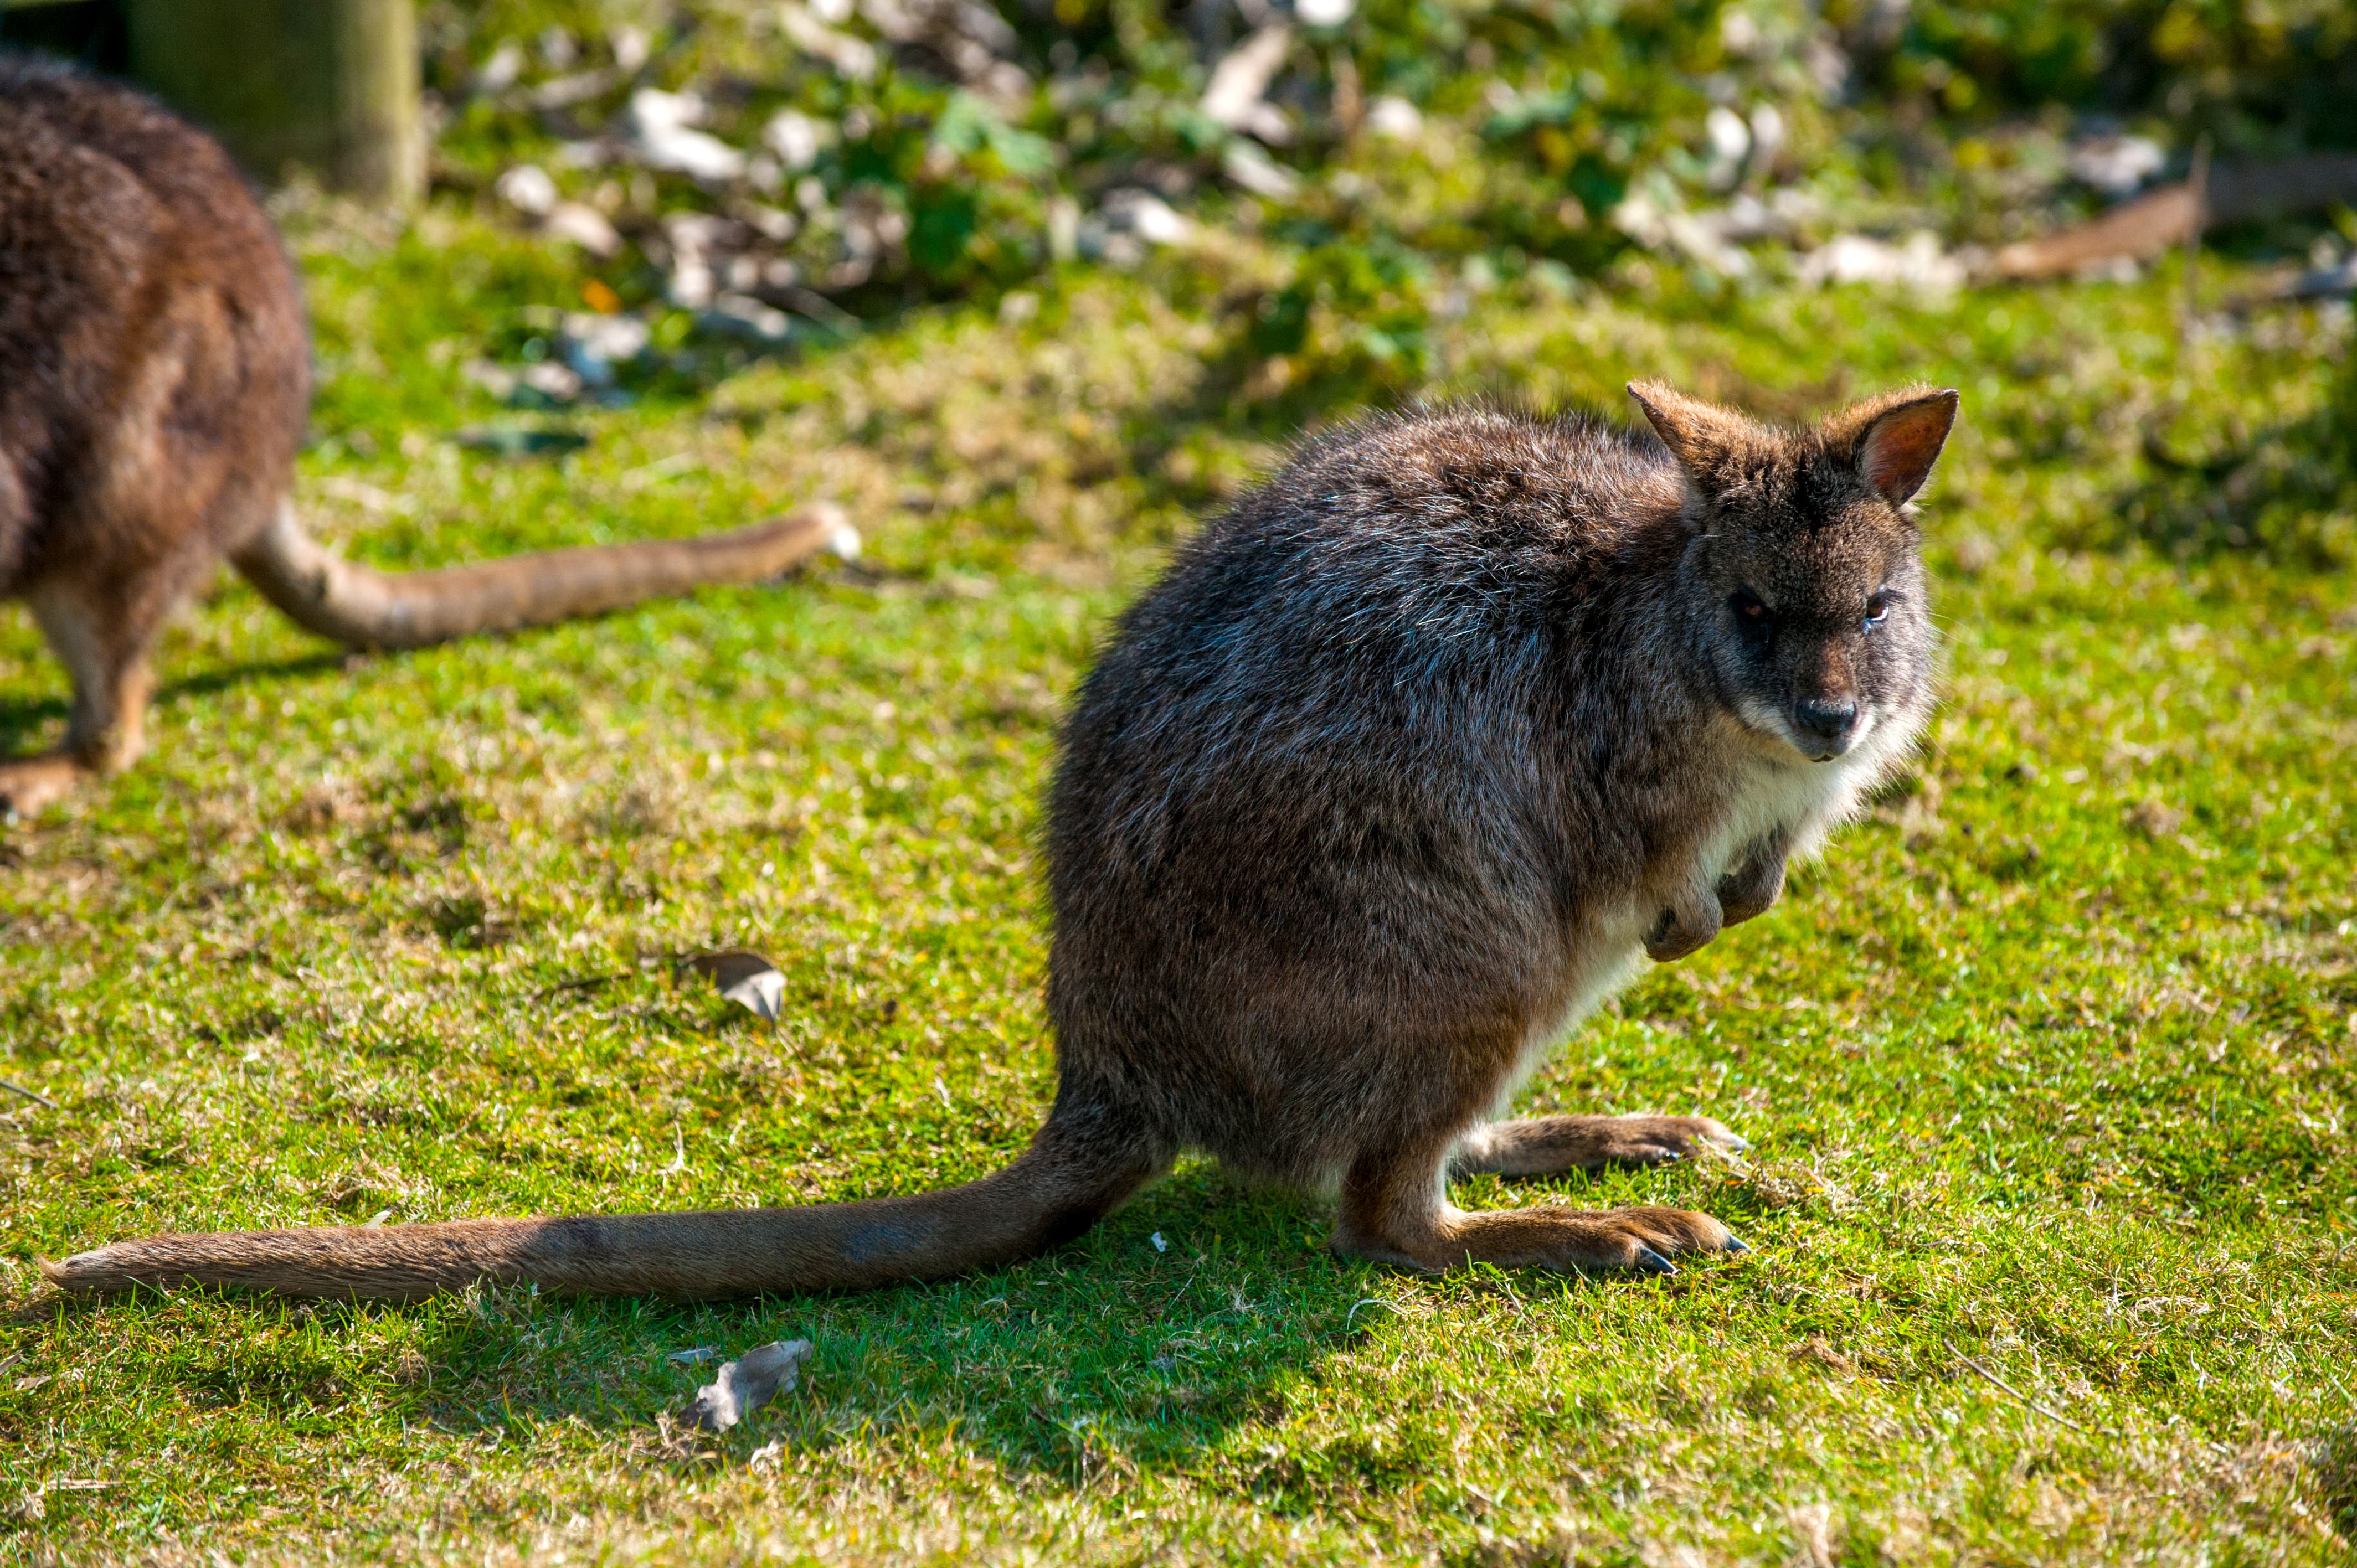 wallaby animal facts